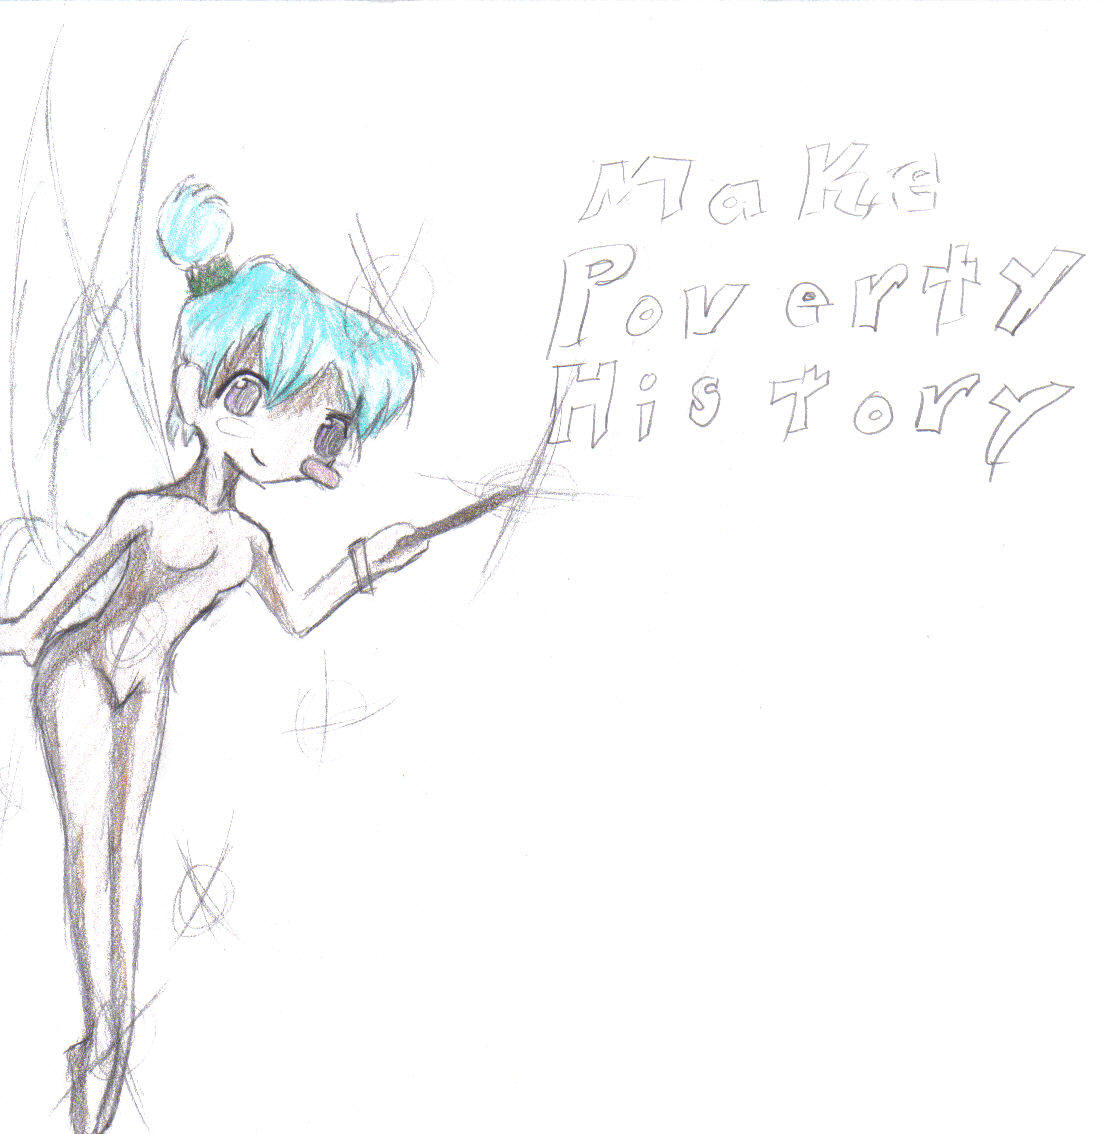 Poverty Pixie by Penguins_luv_LSD